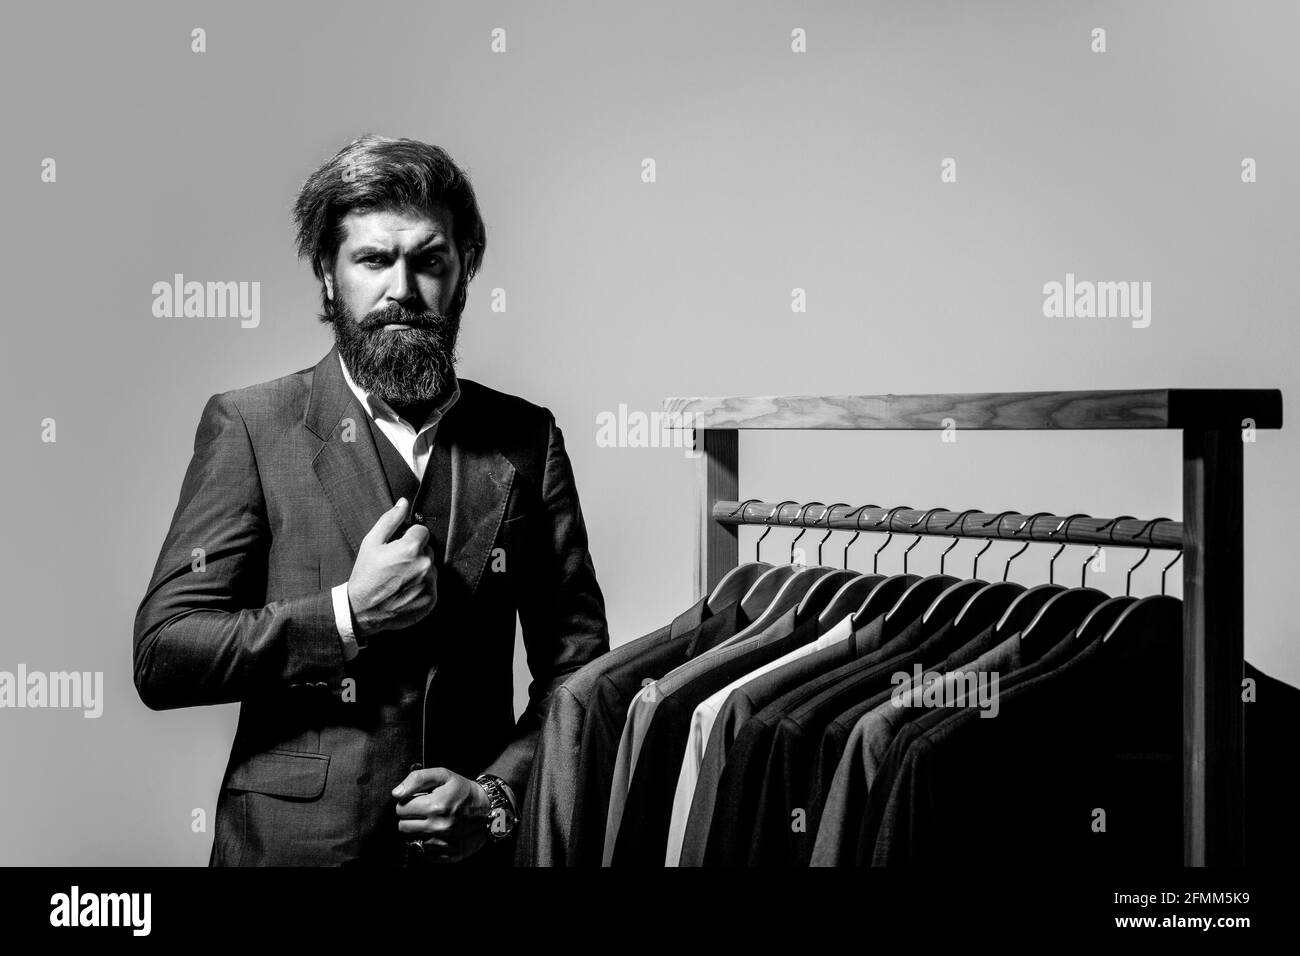 Male suits hanging in a row. Men clothing, boutiques. Tailor, tailoring. Stylish men's suit. Man suit, tailor in his workshop. Black and white Stock Photo